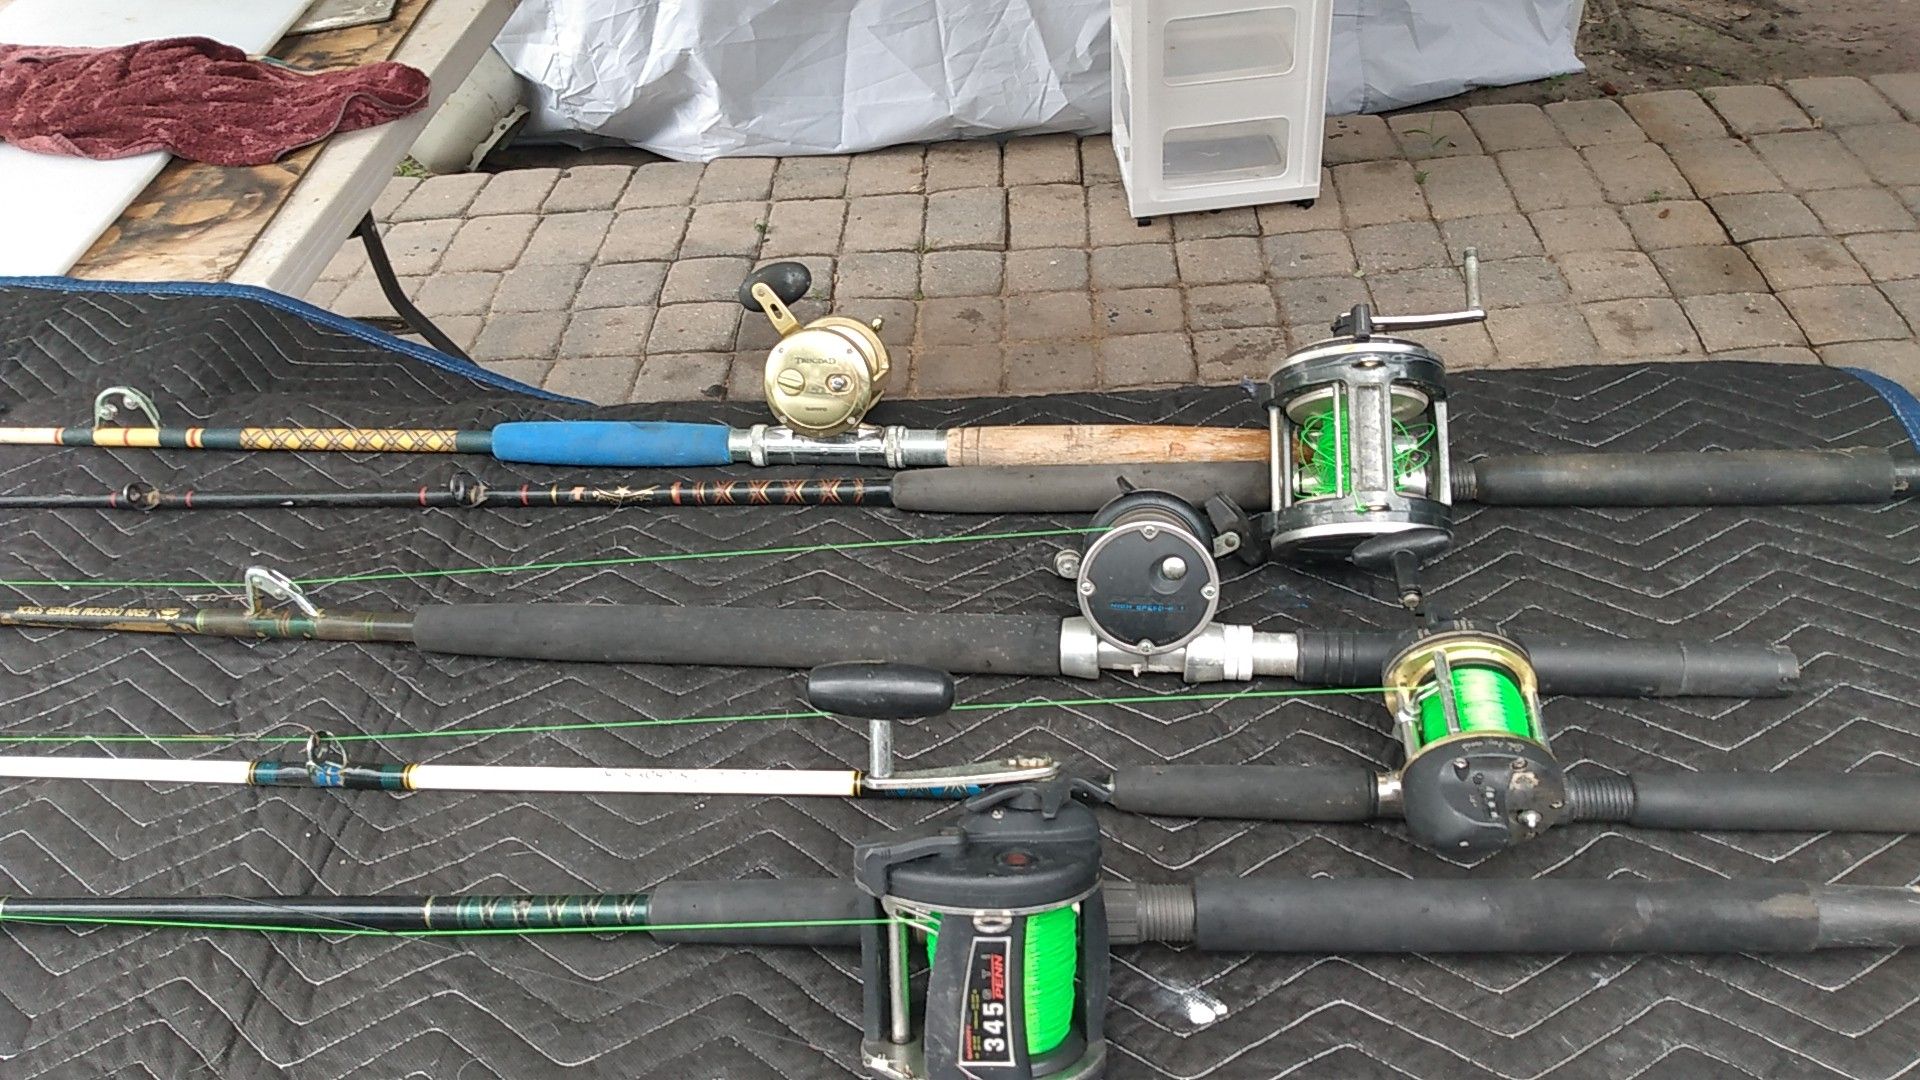 Fishing rod and reels